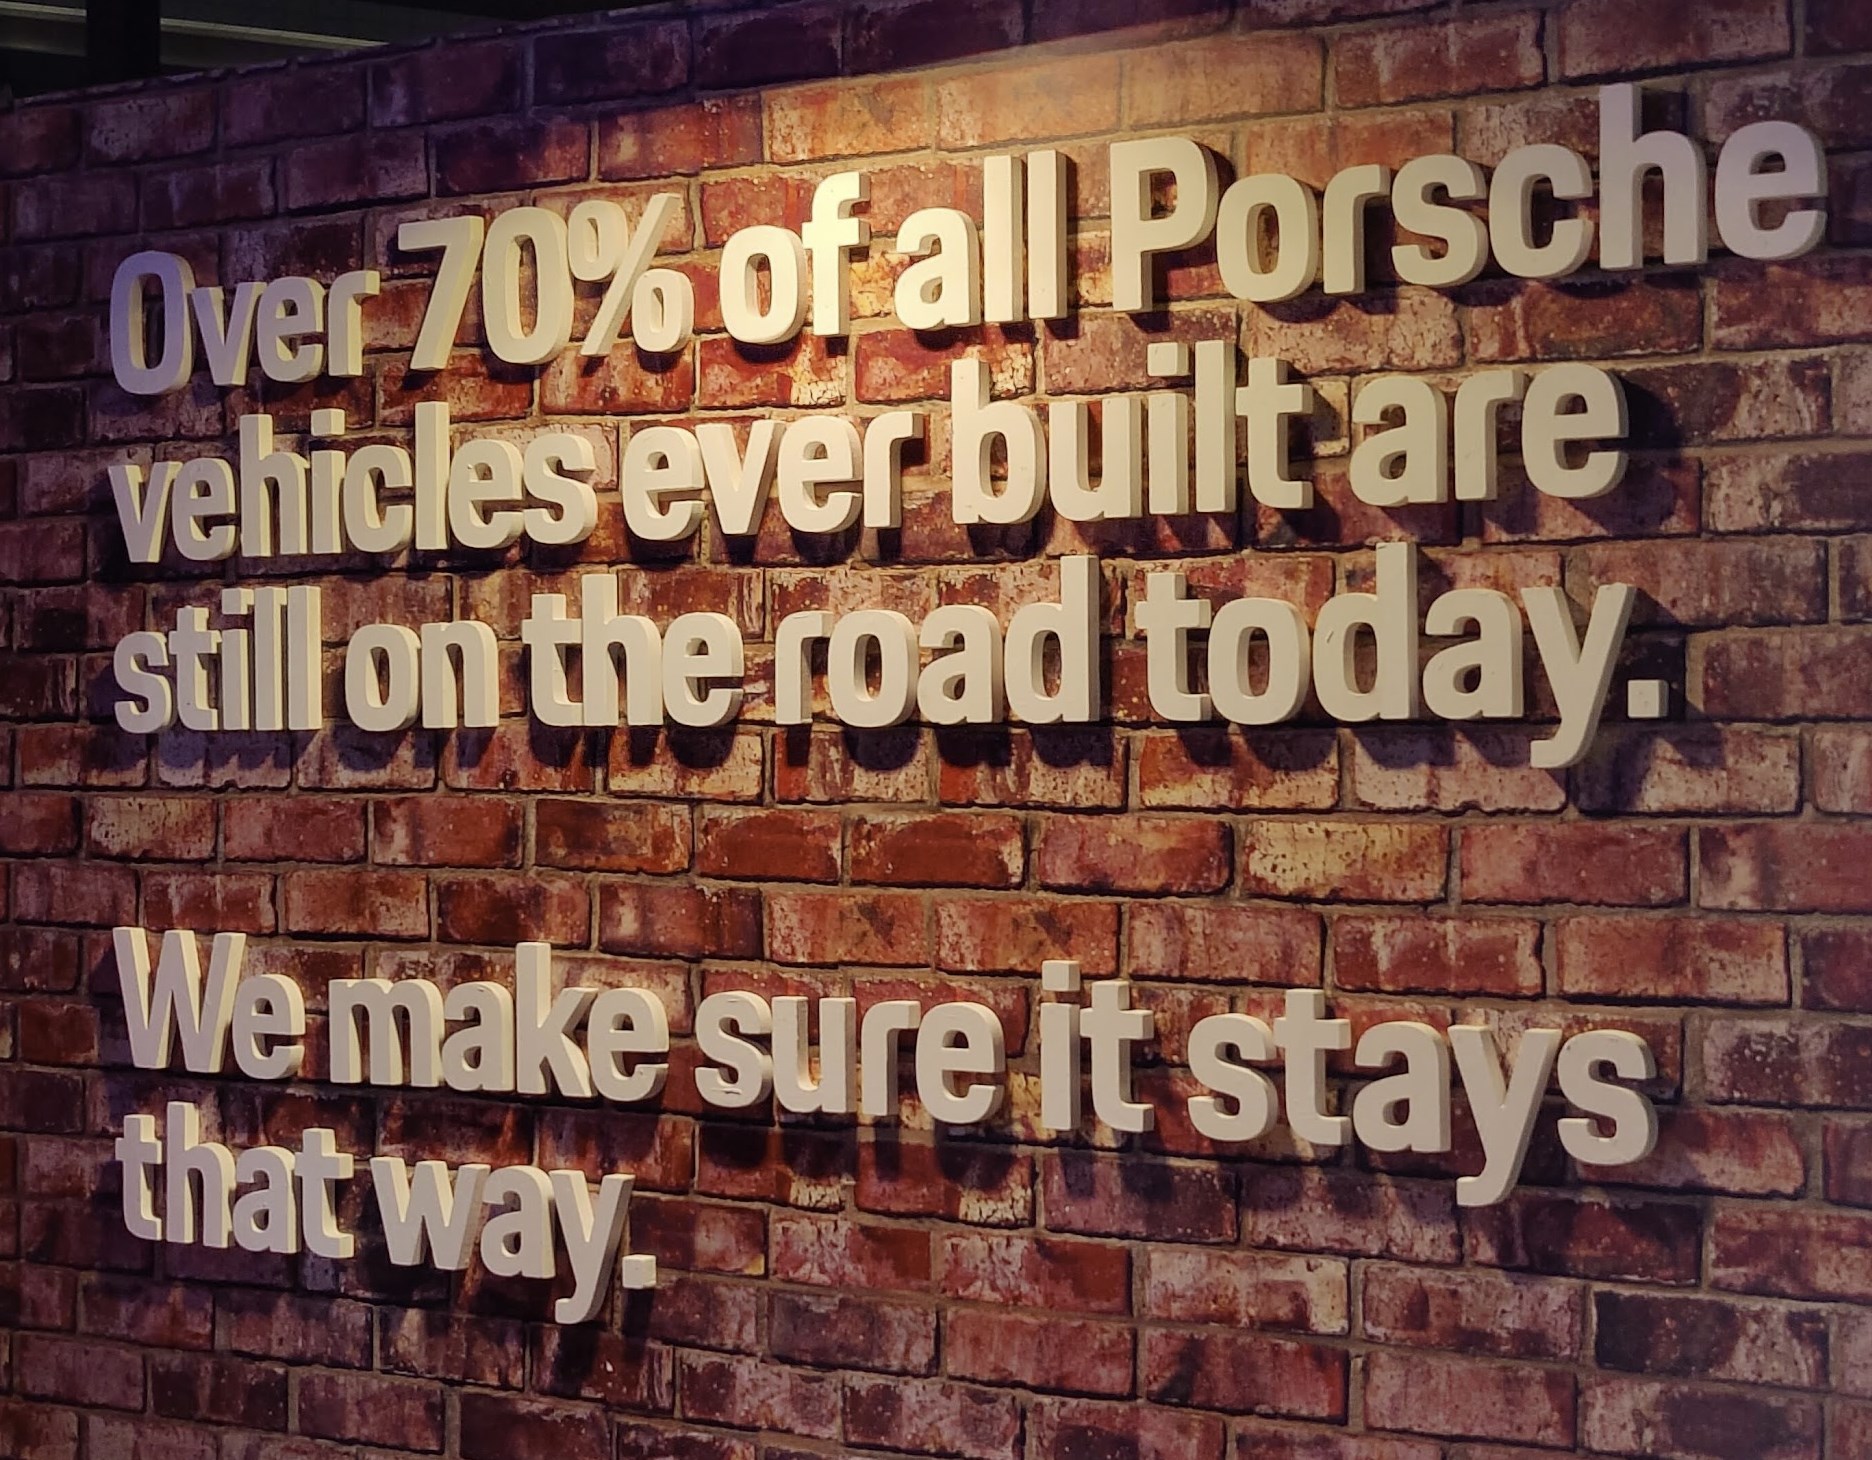 Over 70% of all Porsche vehicles ever built are still on the road today